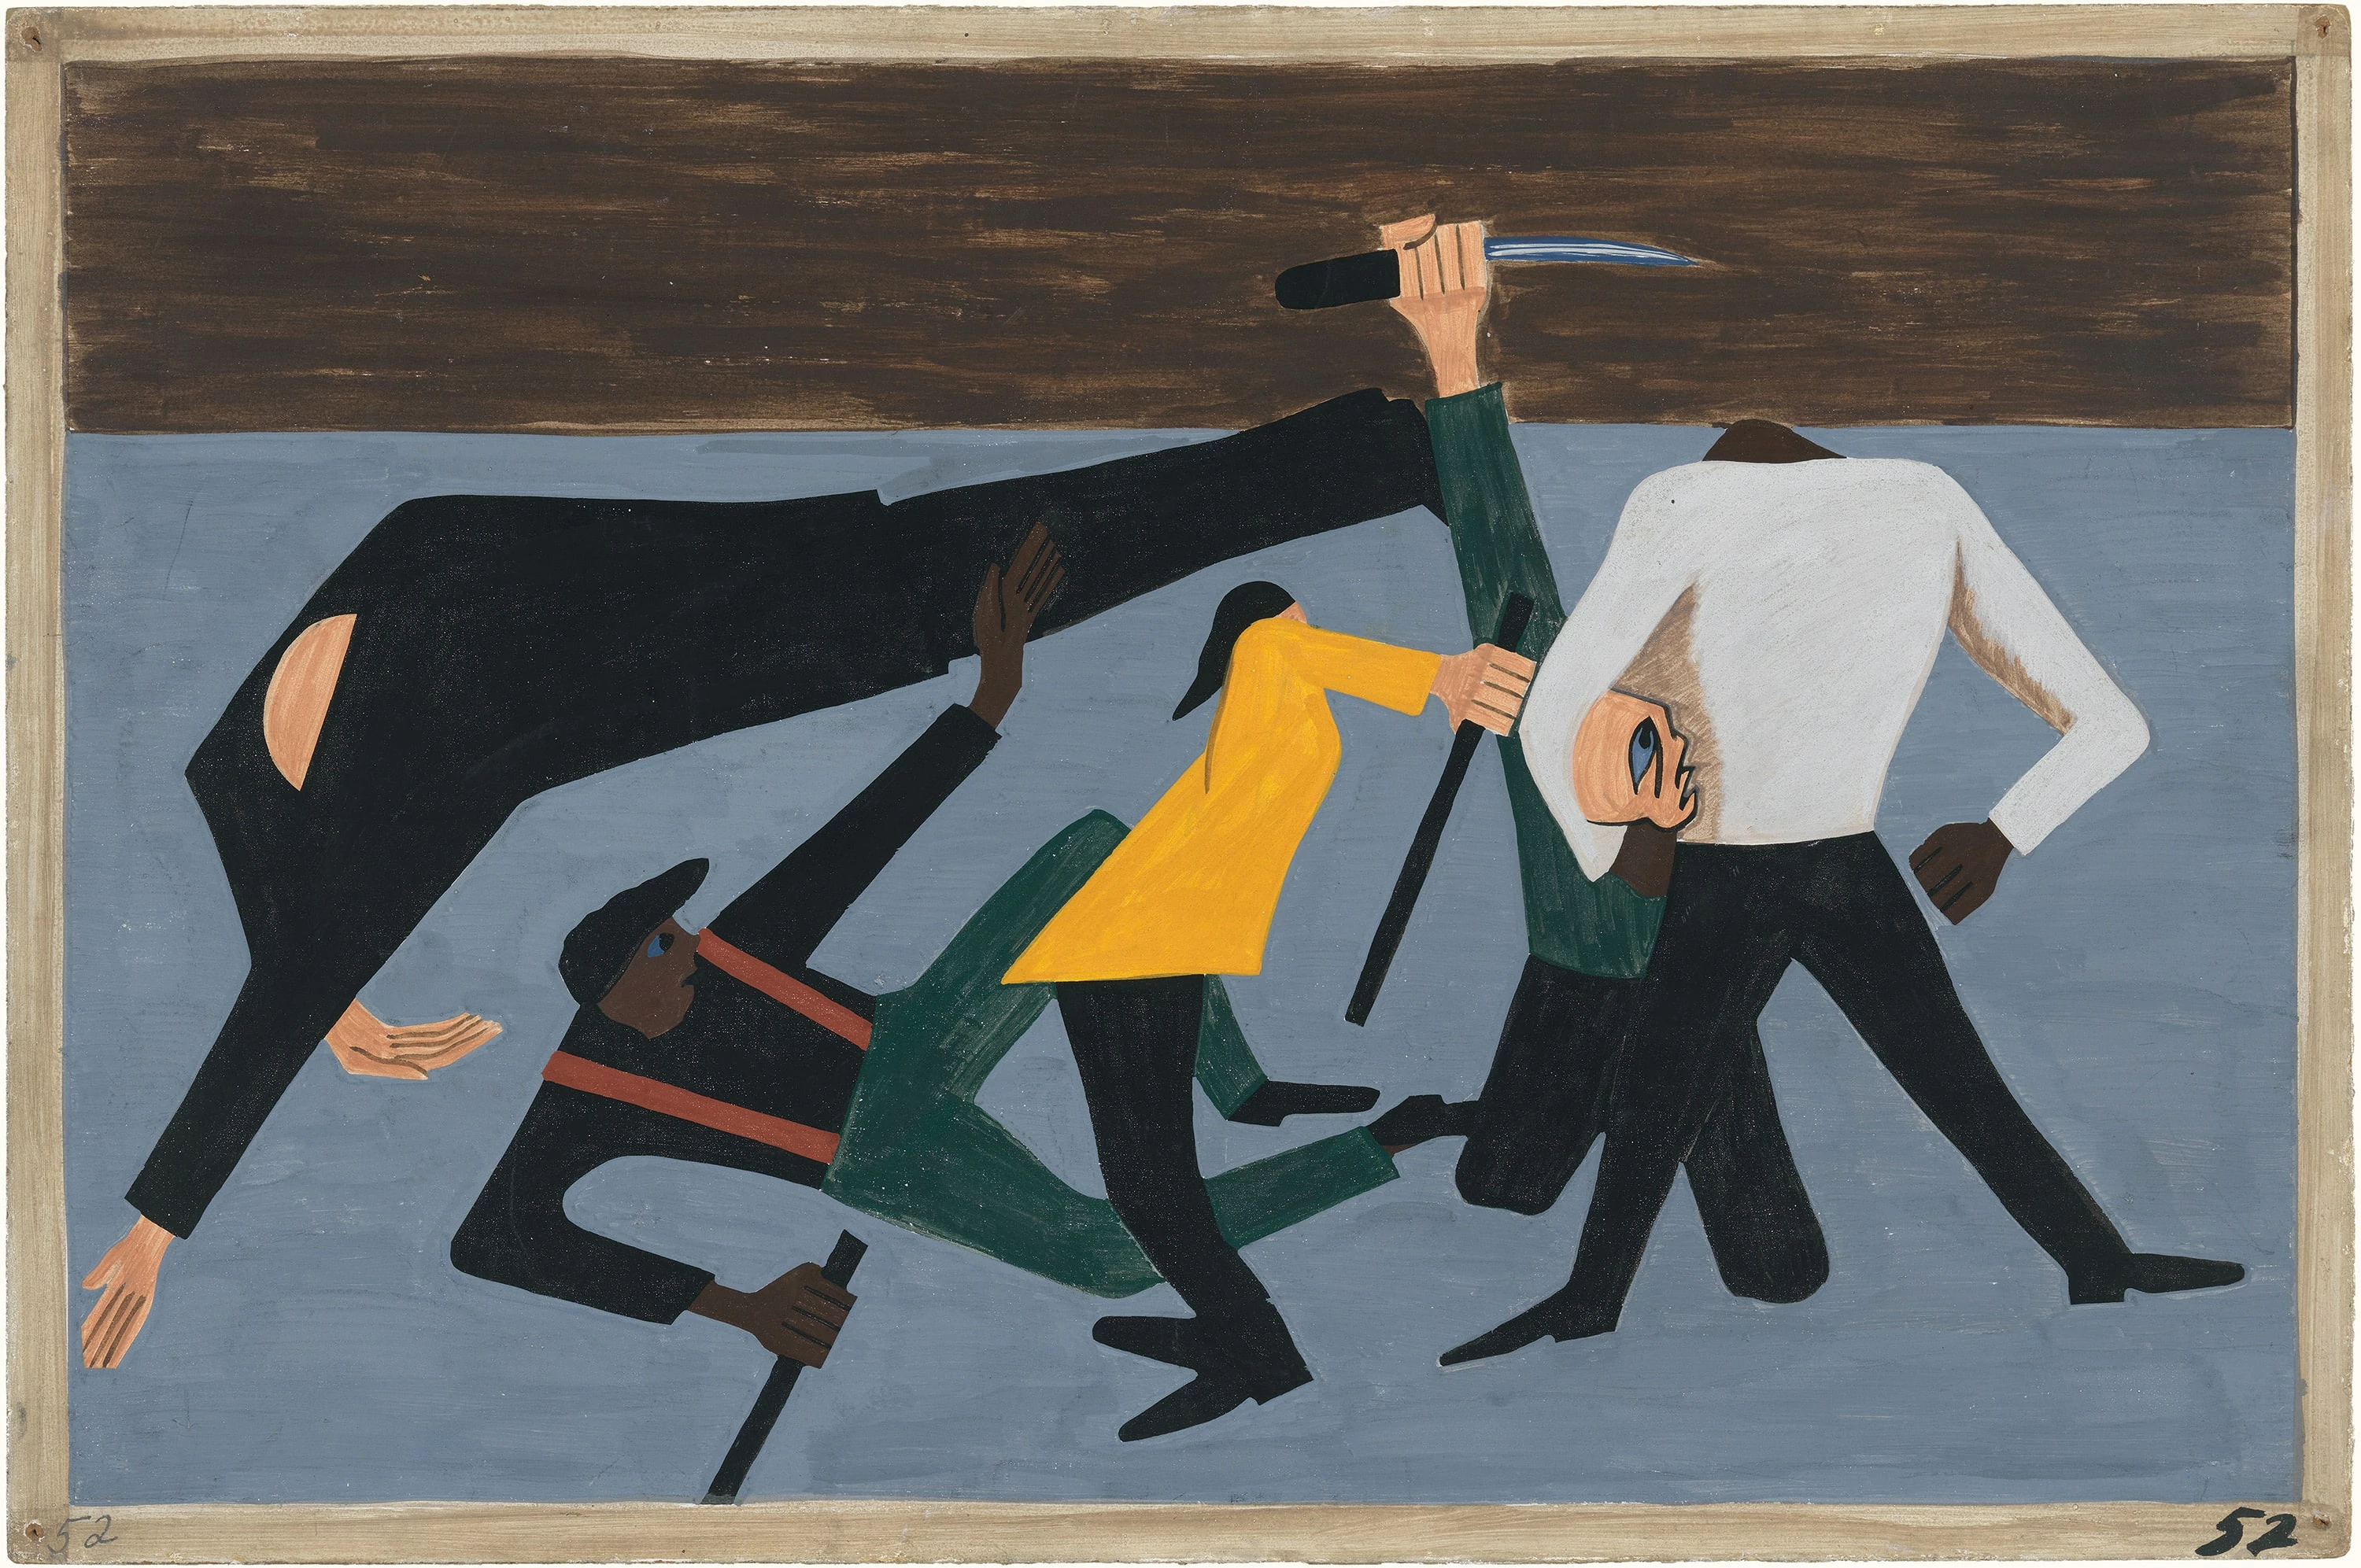 Migration Series No.52: One of the most violent race riots occurred in East St. Louis, Jacob Lawrence